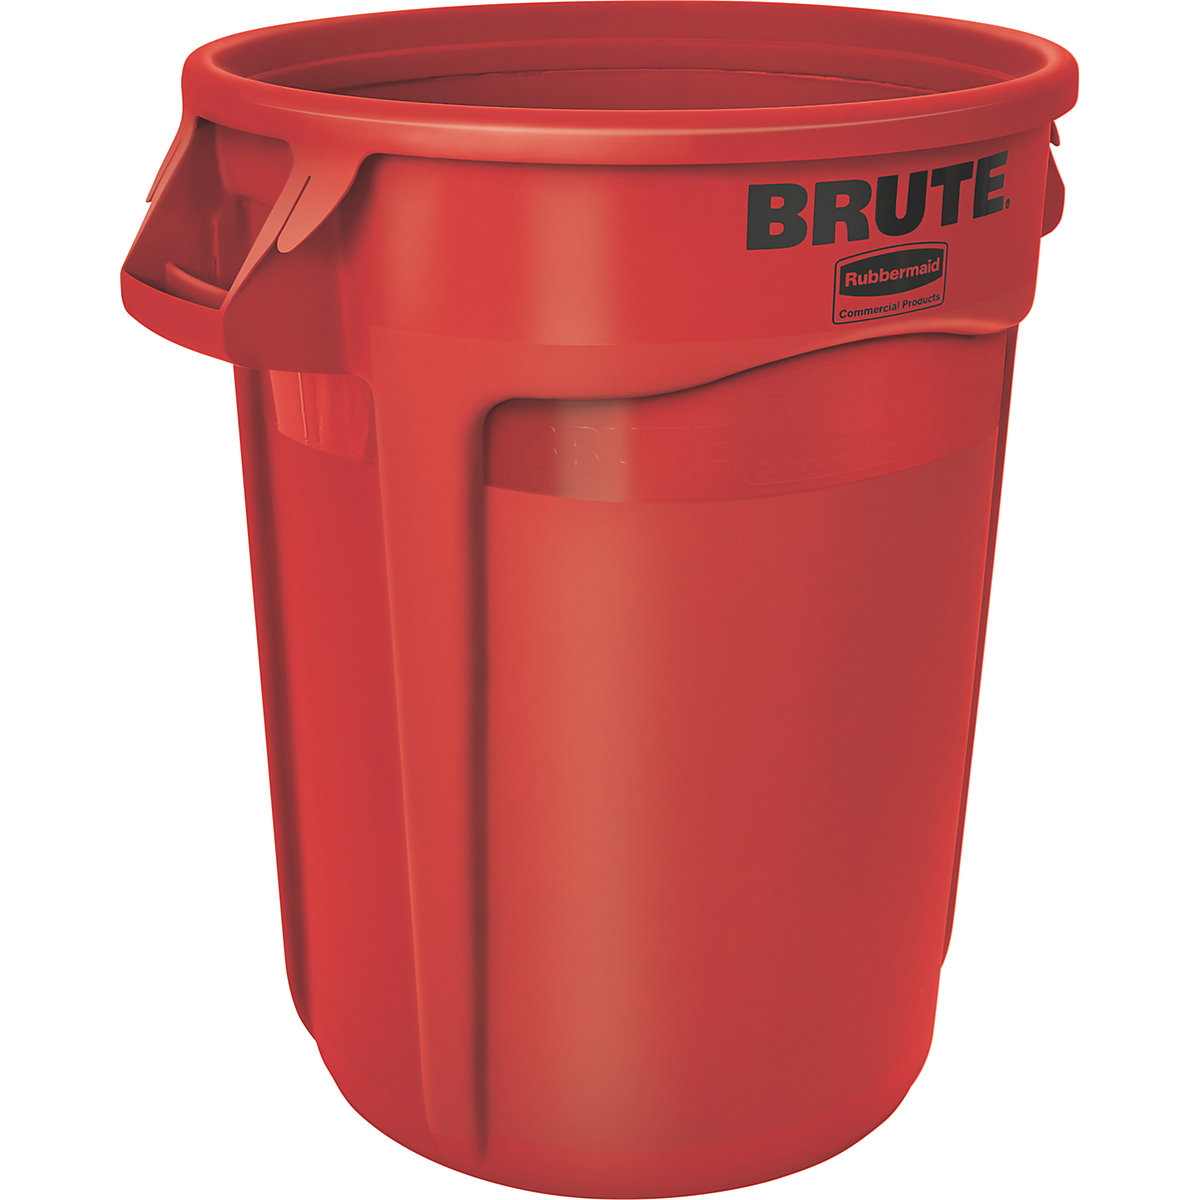 BRUTE® universal container, round – Rubbermaid, capacity 121 l, red-13